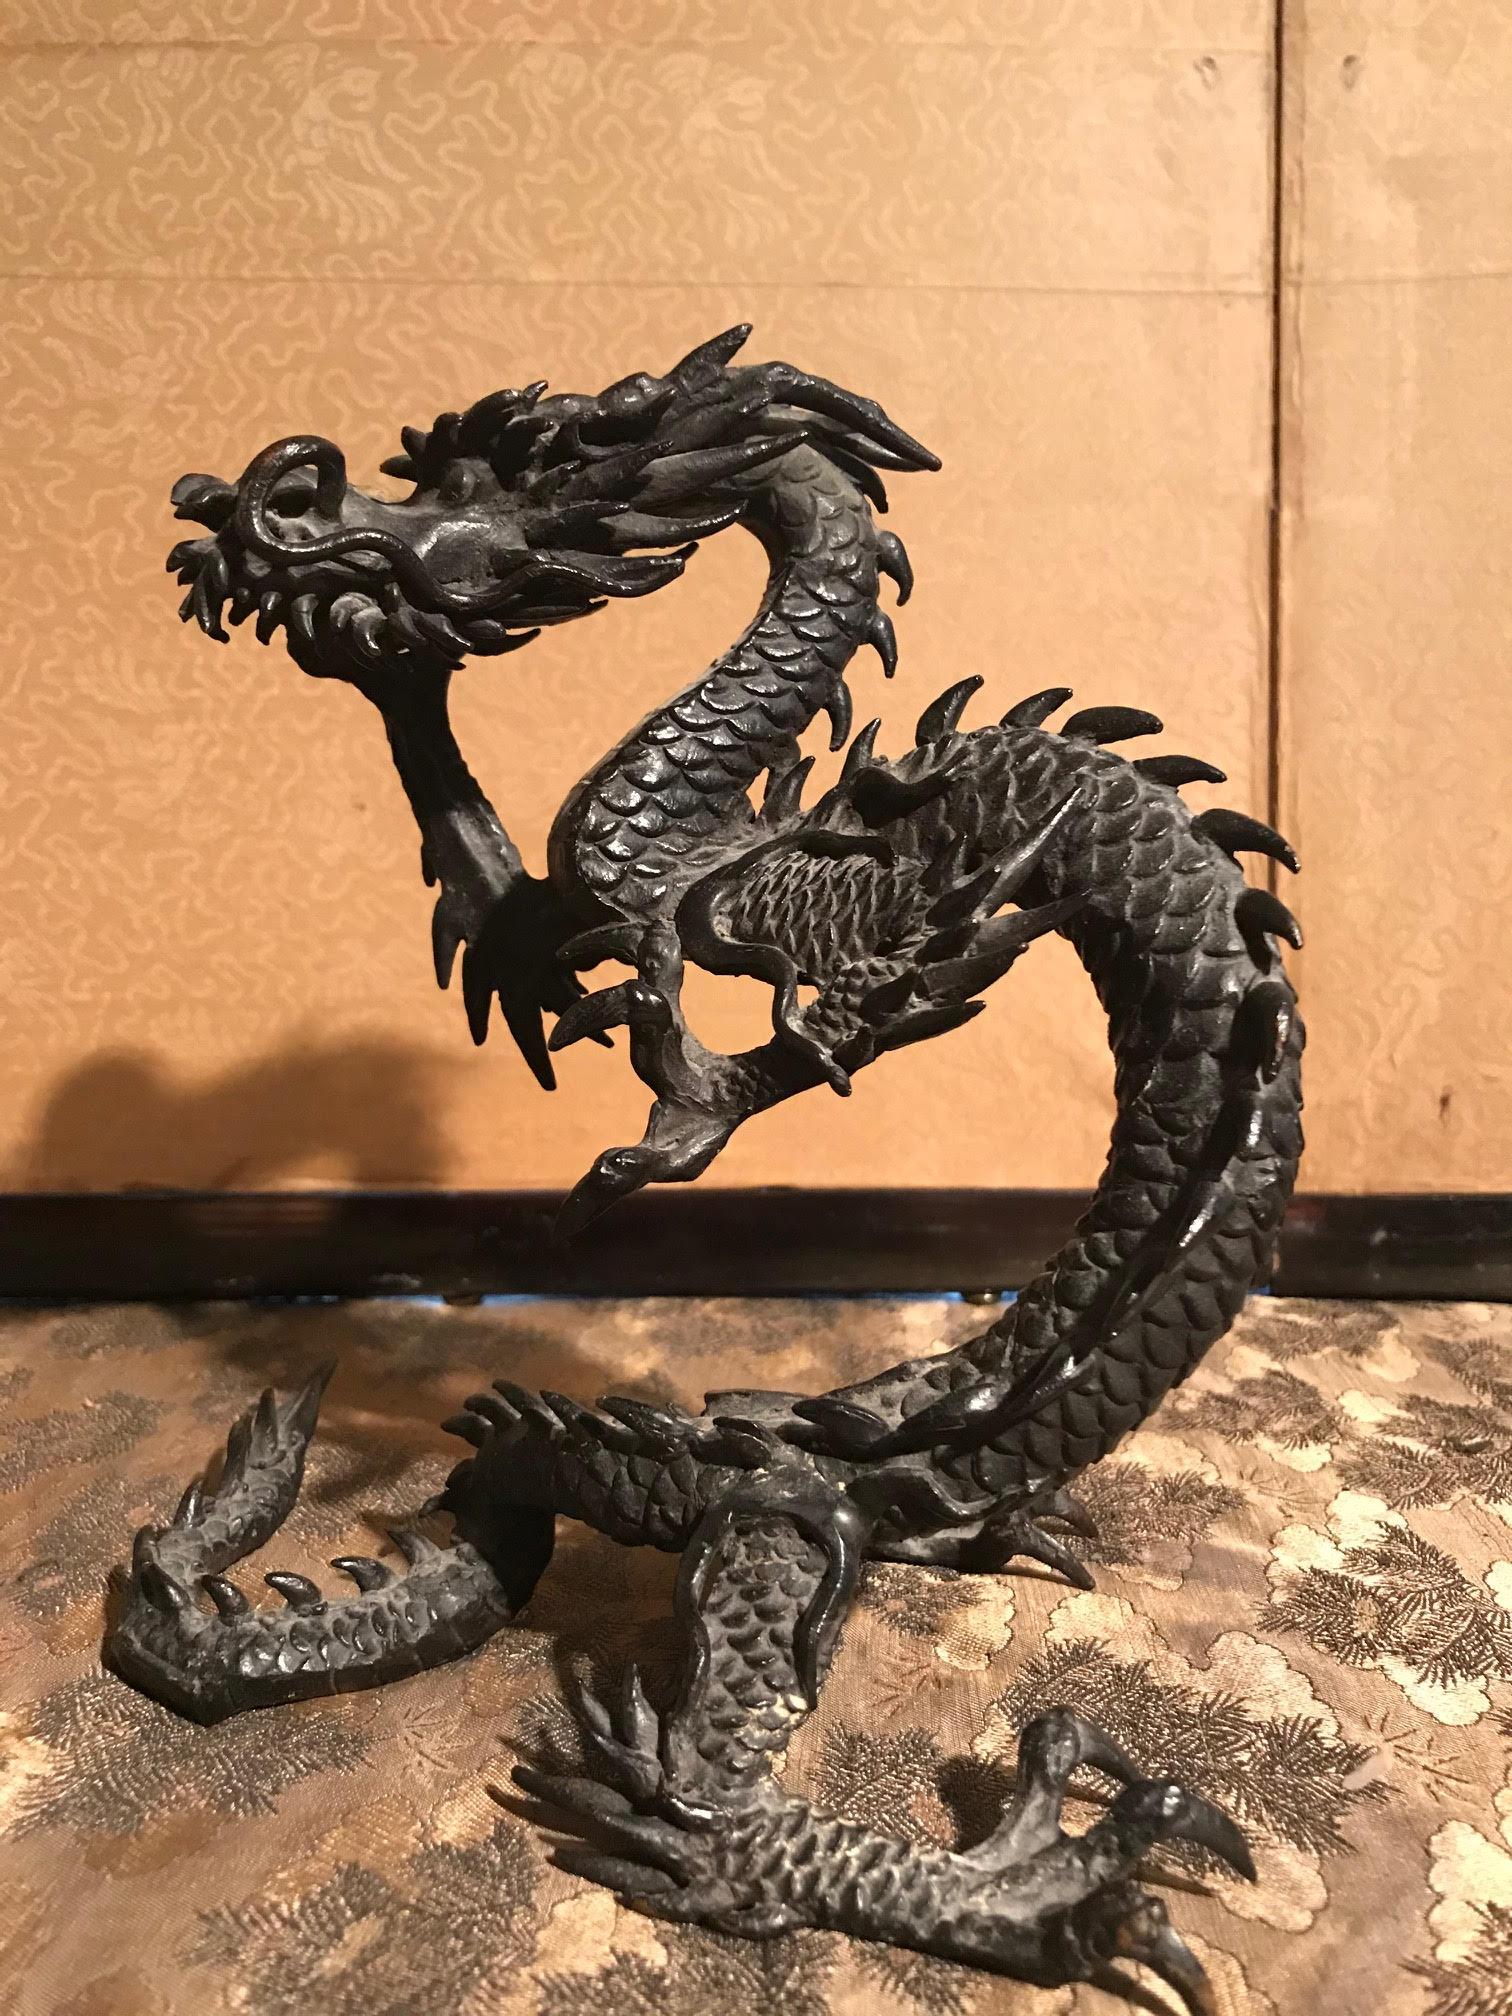 Japanese Meiji period bronze dragon sculpture holding up a gilt bronze ball. The piece was likely made in circa 1890 and has a rich dark bronze patina. It has a makers mark on the bottom. In great antique condition with age-appropriate wear and use.